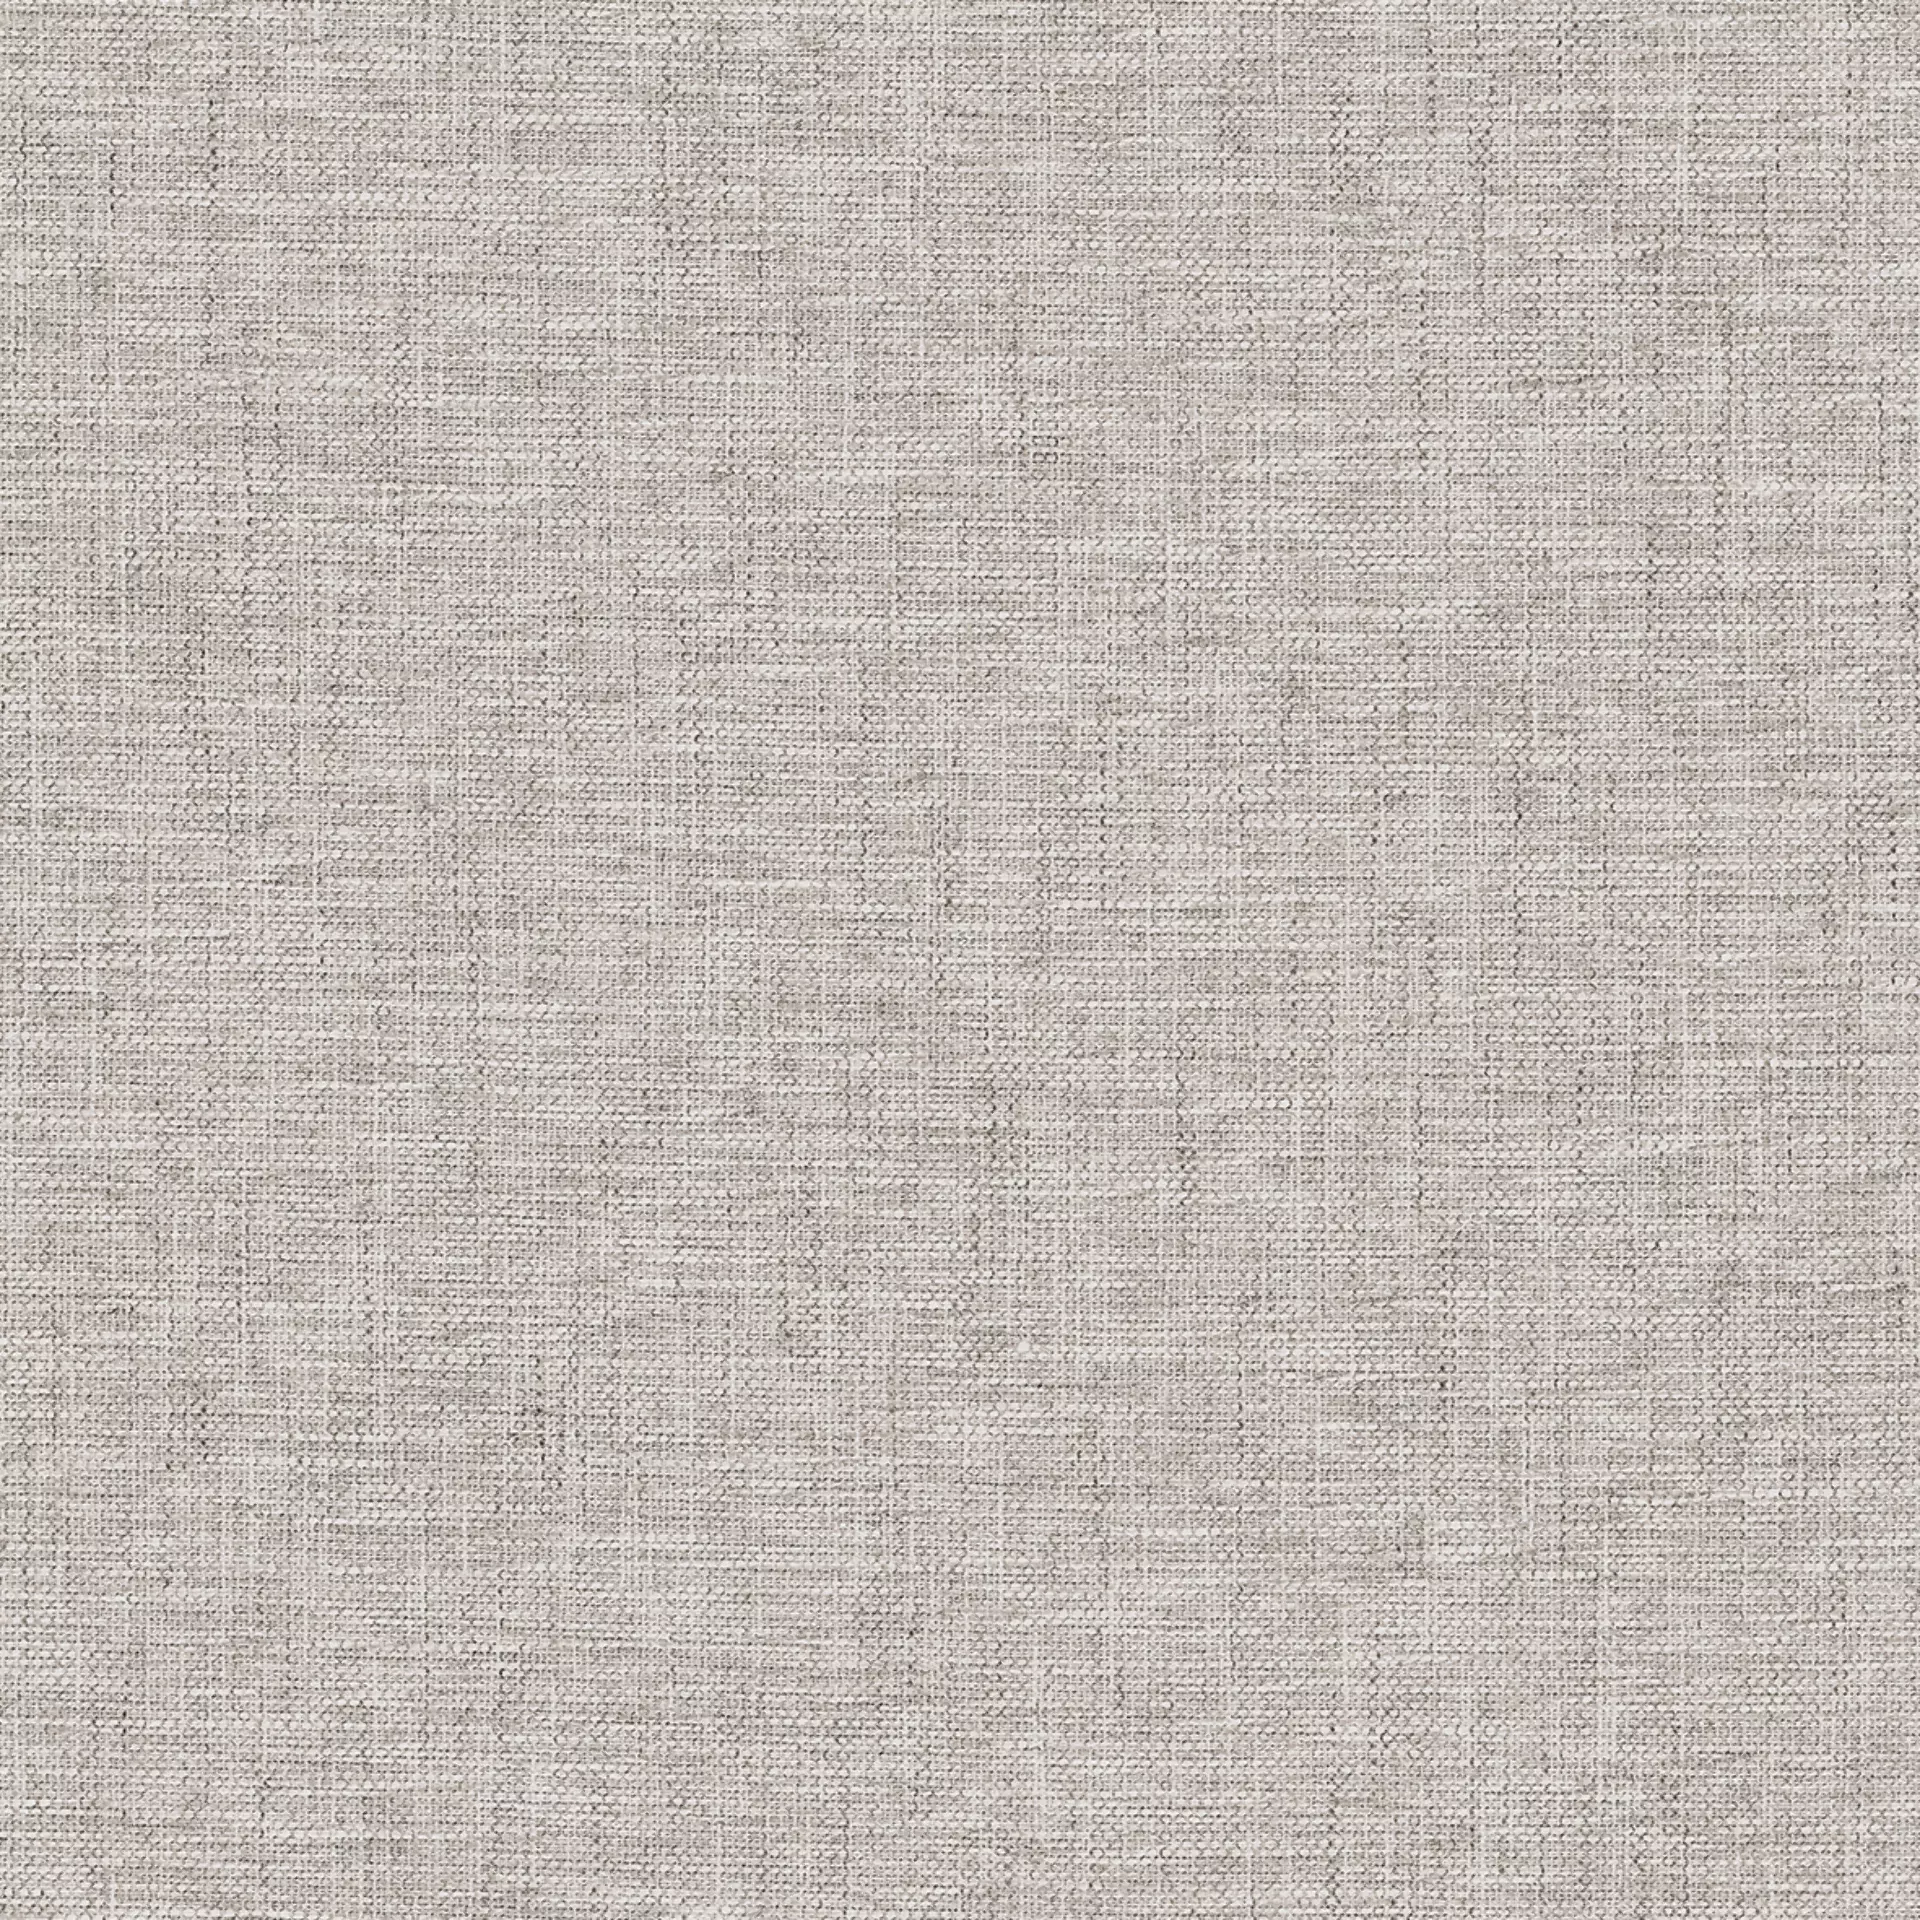 Sant Agostino Fineart Pearl Natural CSAFI7PE60 60x60cm rectified 10mm